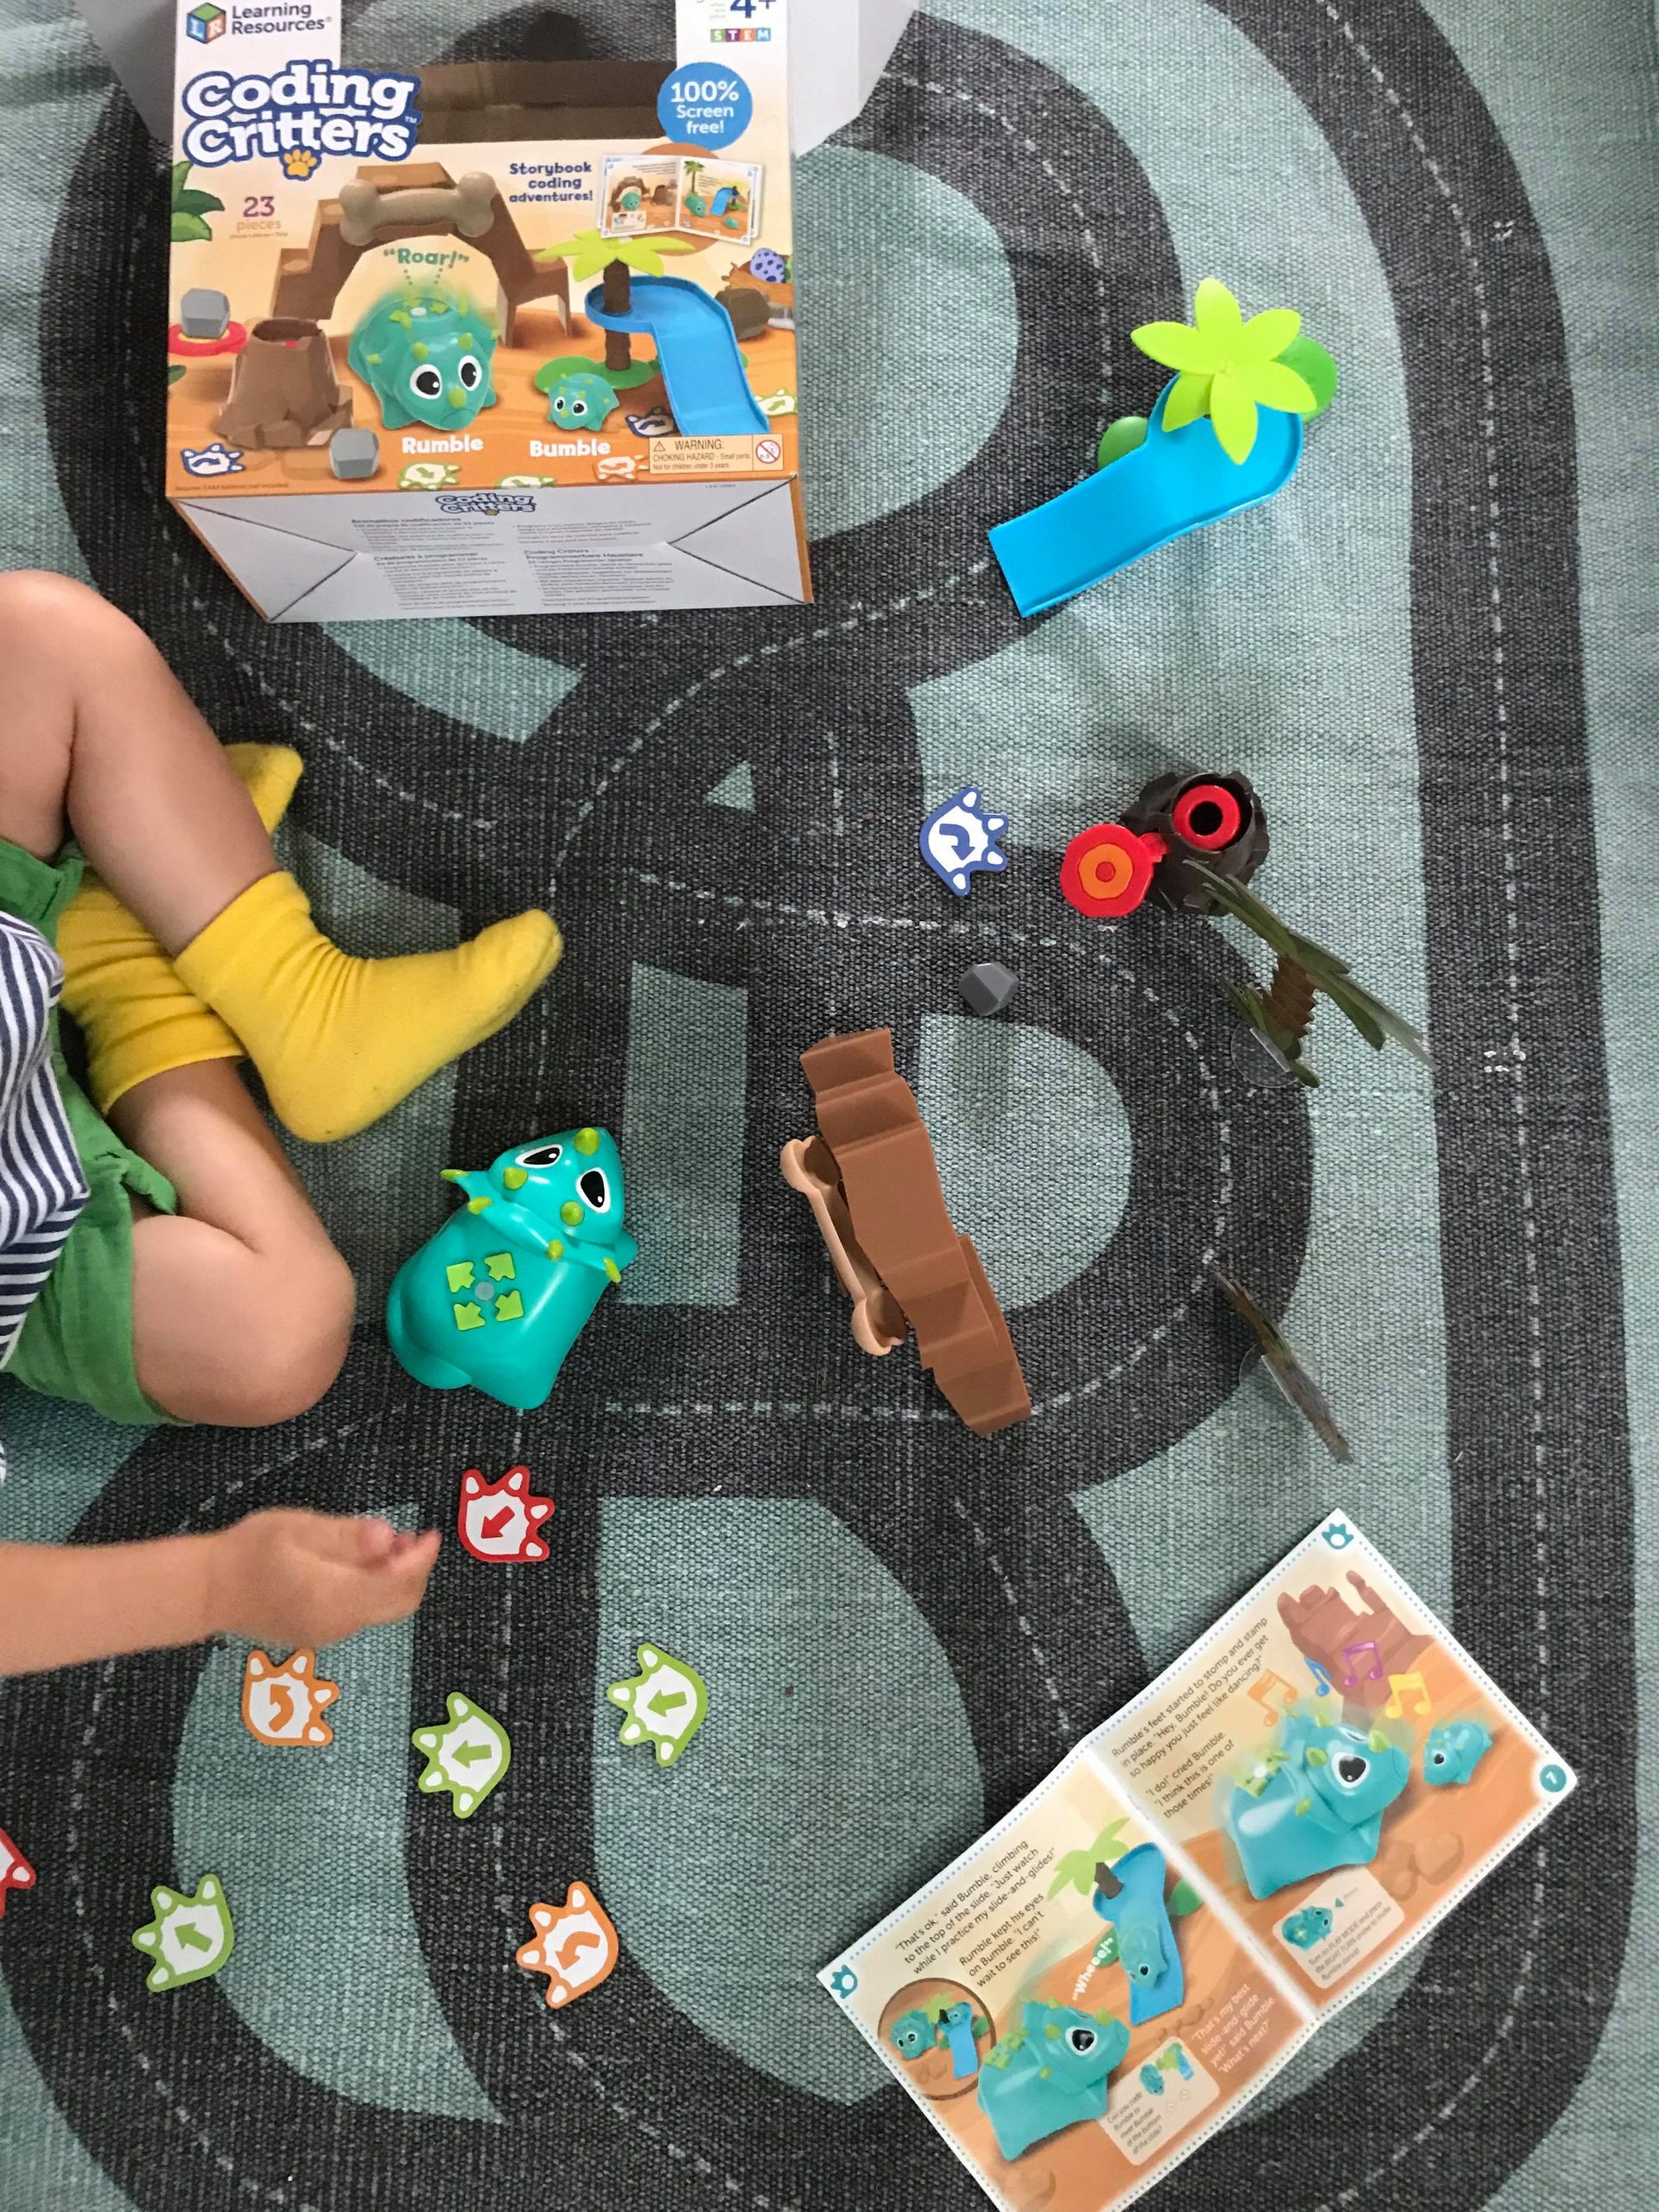 You are currently viewing STEM Toys: Coding Critters #GIFTED